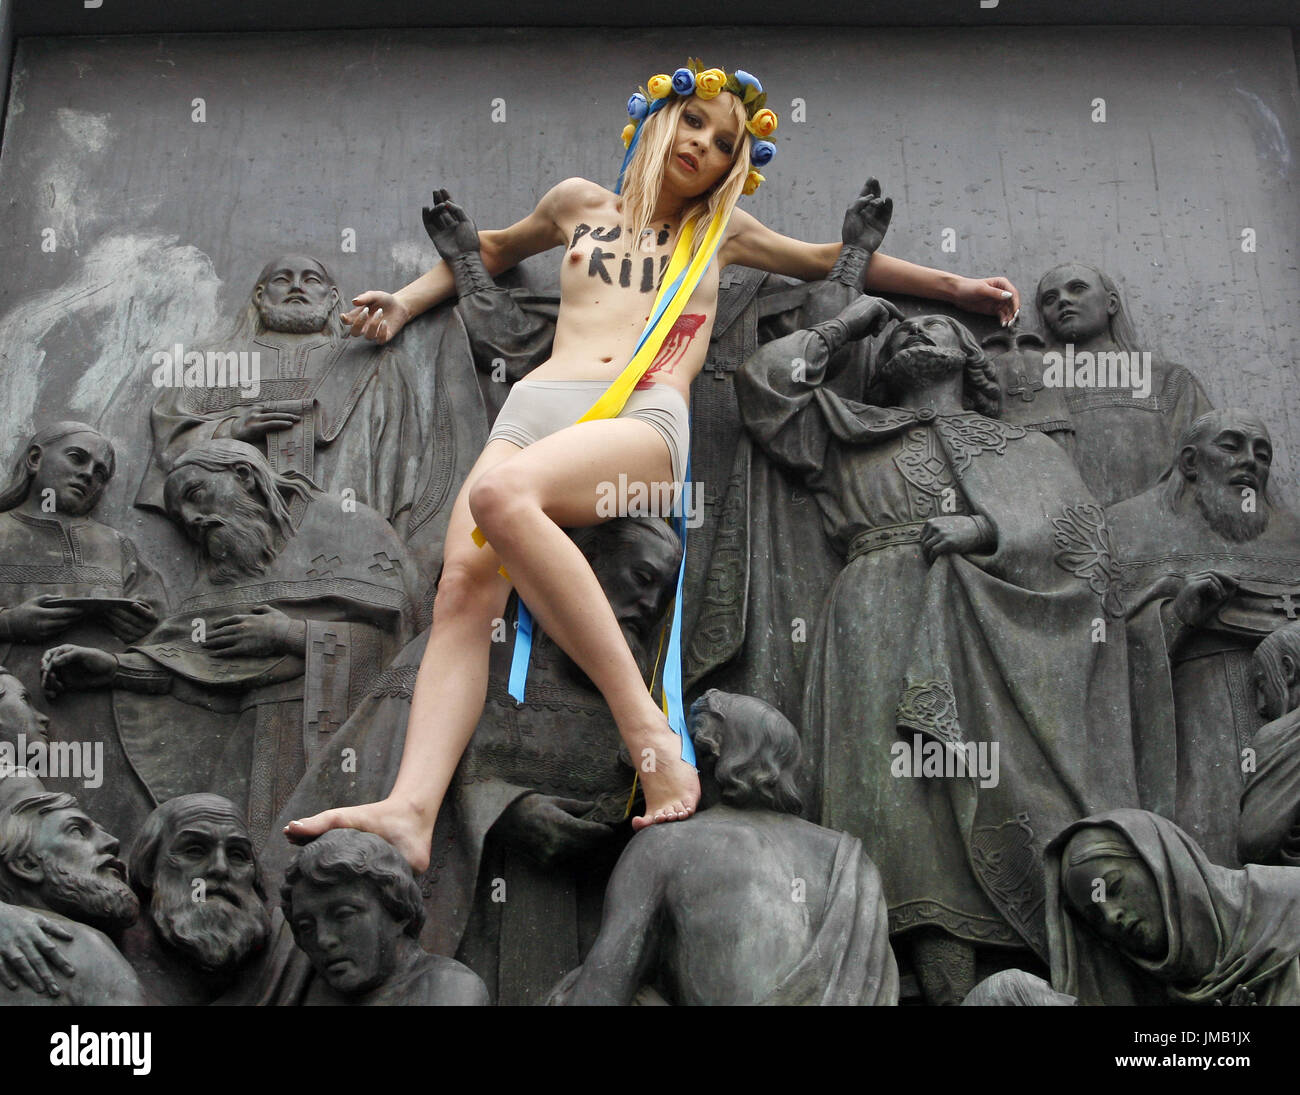 Kiev, Ukraine. 27th July, 2017. An activist of the women feminist movement 'FEMEN' protests on the monumetn of the St. Vladimir Statue, on St. Vladimir's Hill in center Kiev, Ukraine, on 27 July, 2017. FEMEN protest against a religion procession organized by the Ukrainian Orthodox Church of the Moscow Patriarchate in Ukraine, during celebration the 1029th anniversary of Kievan Rus Christianization in Kiev. Credit: Serg Glovny/ZUMA Wire/Alamy Live News Stock Photo